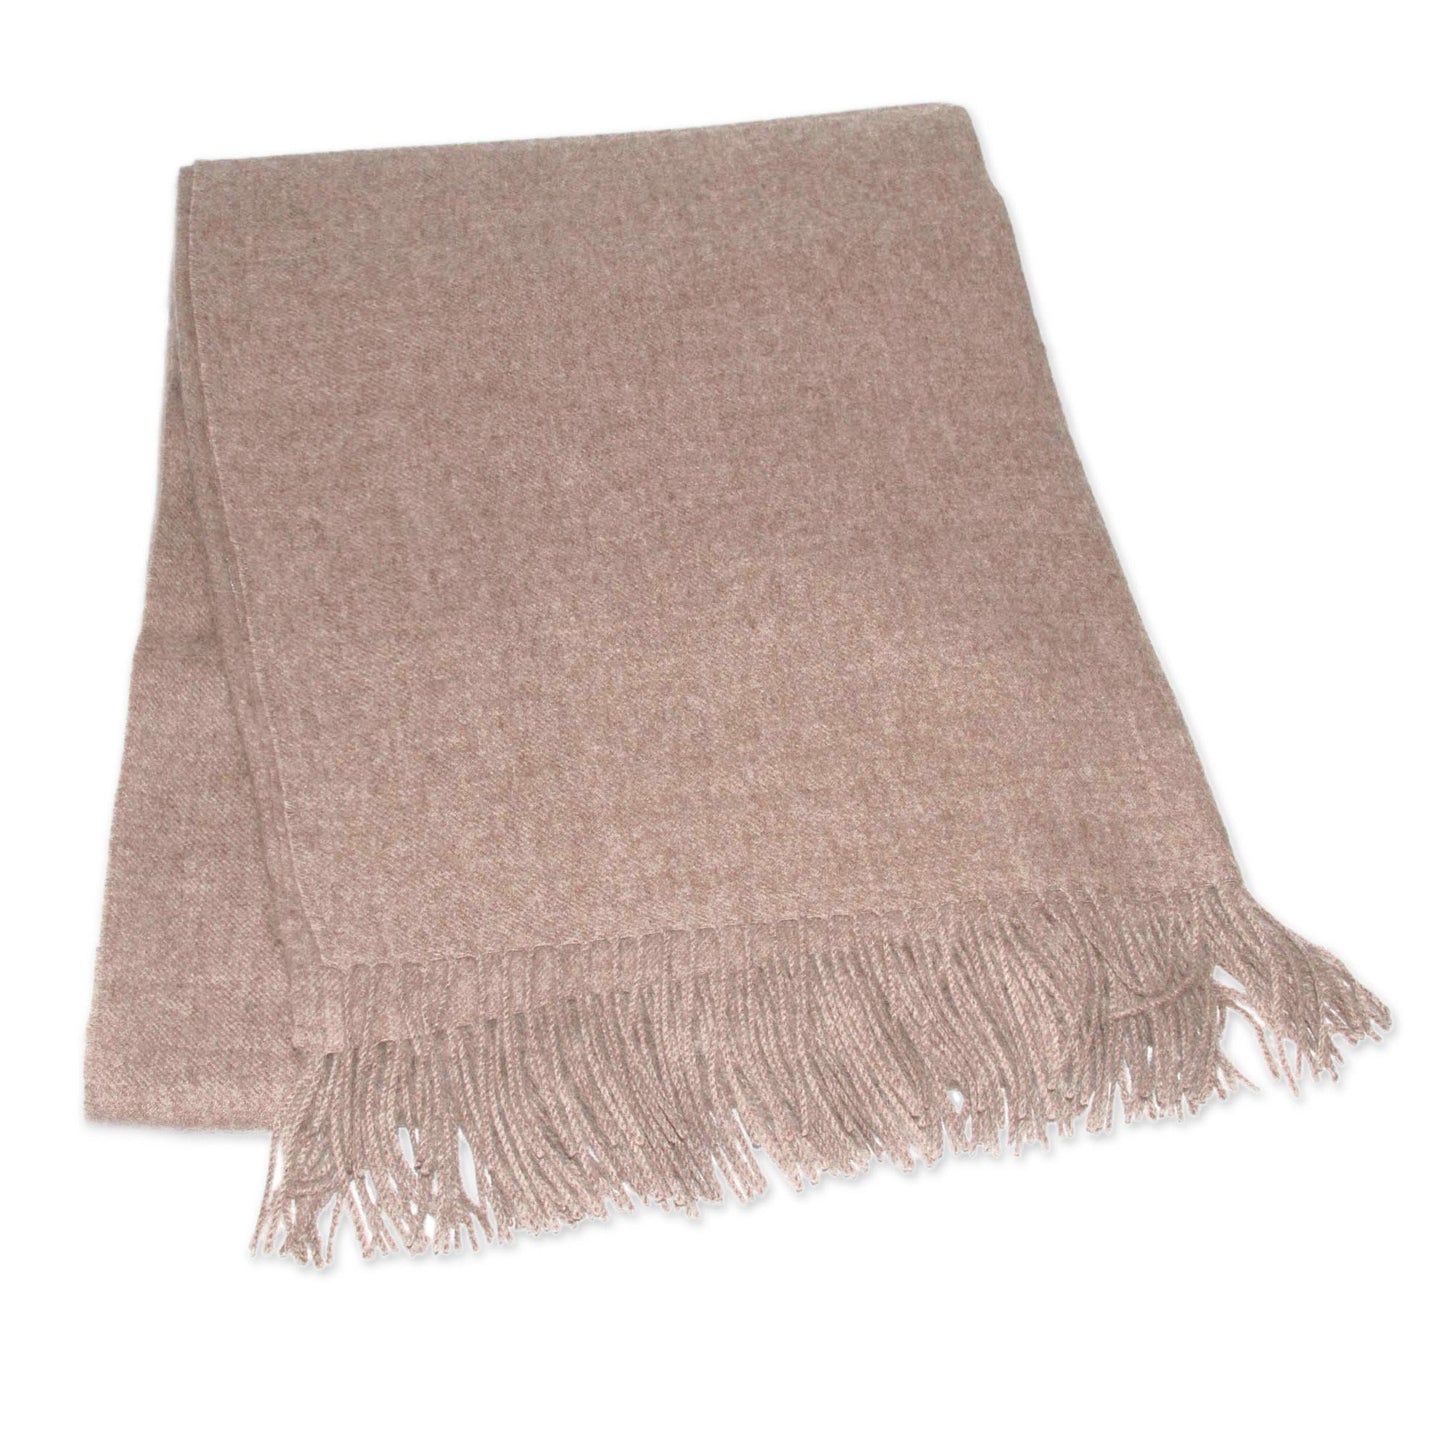 Cozy Light Brown Hand Crafted Alpaca Wool Solid Throw